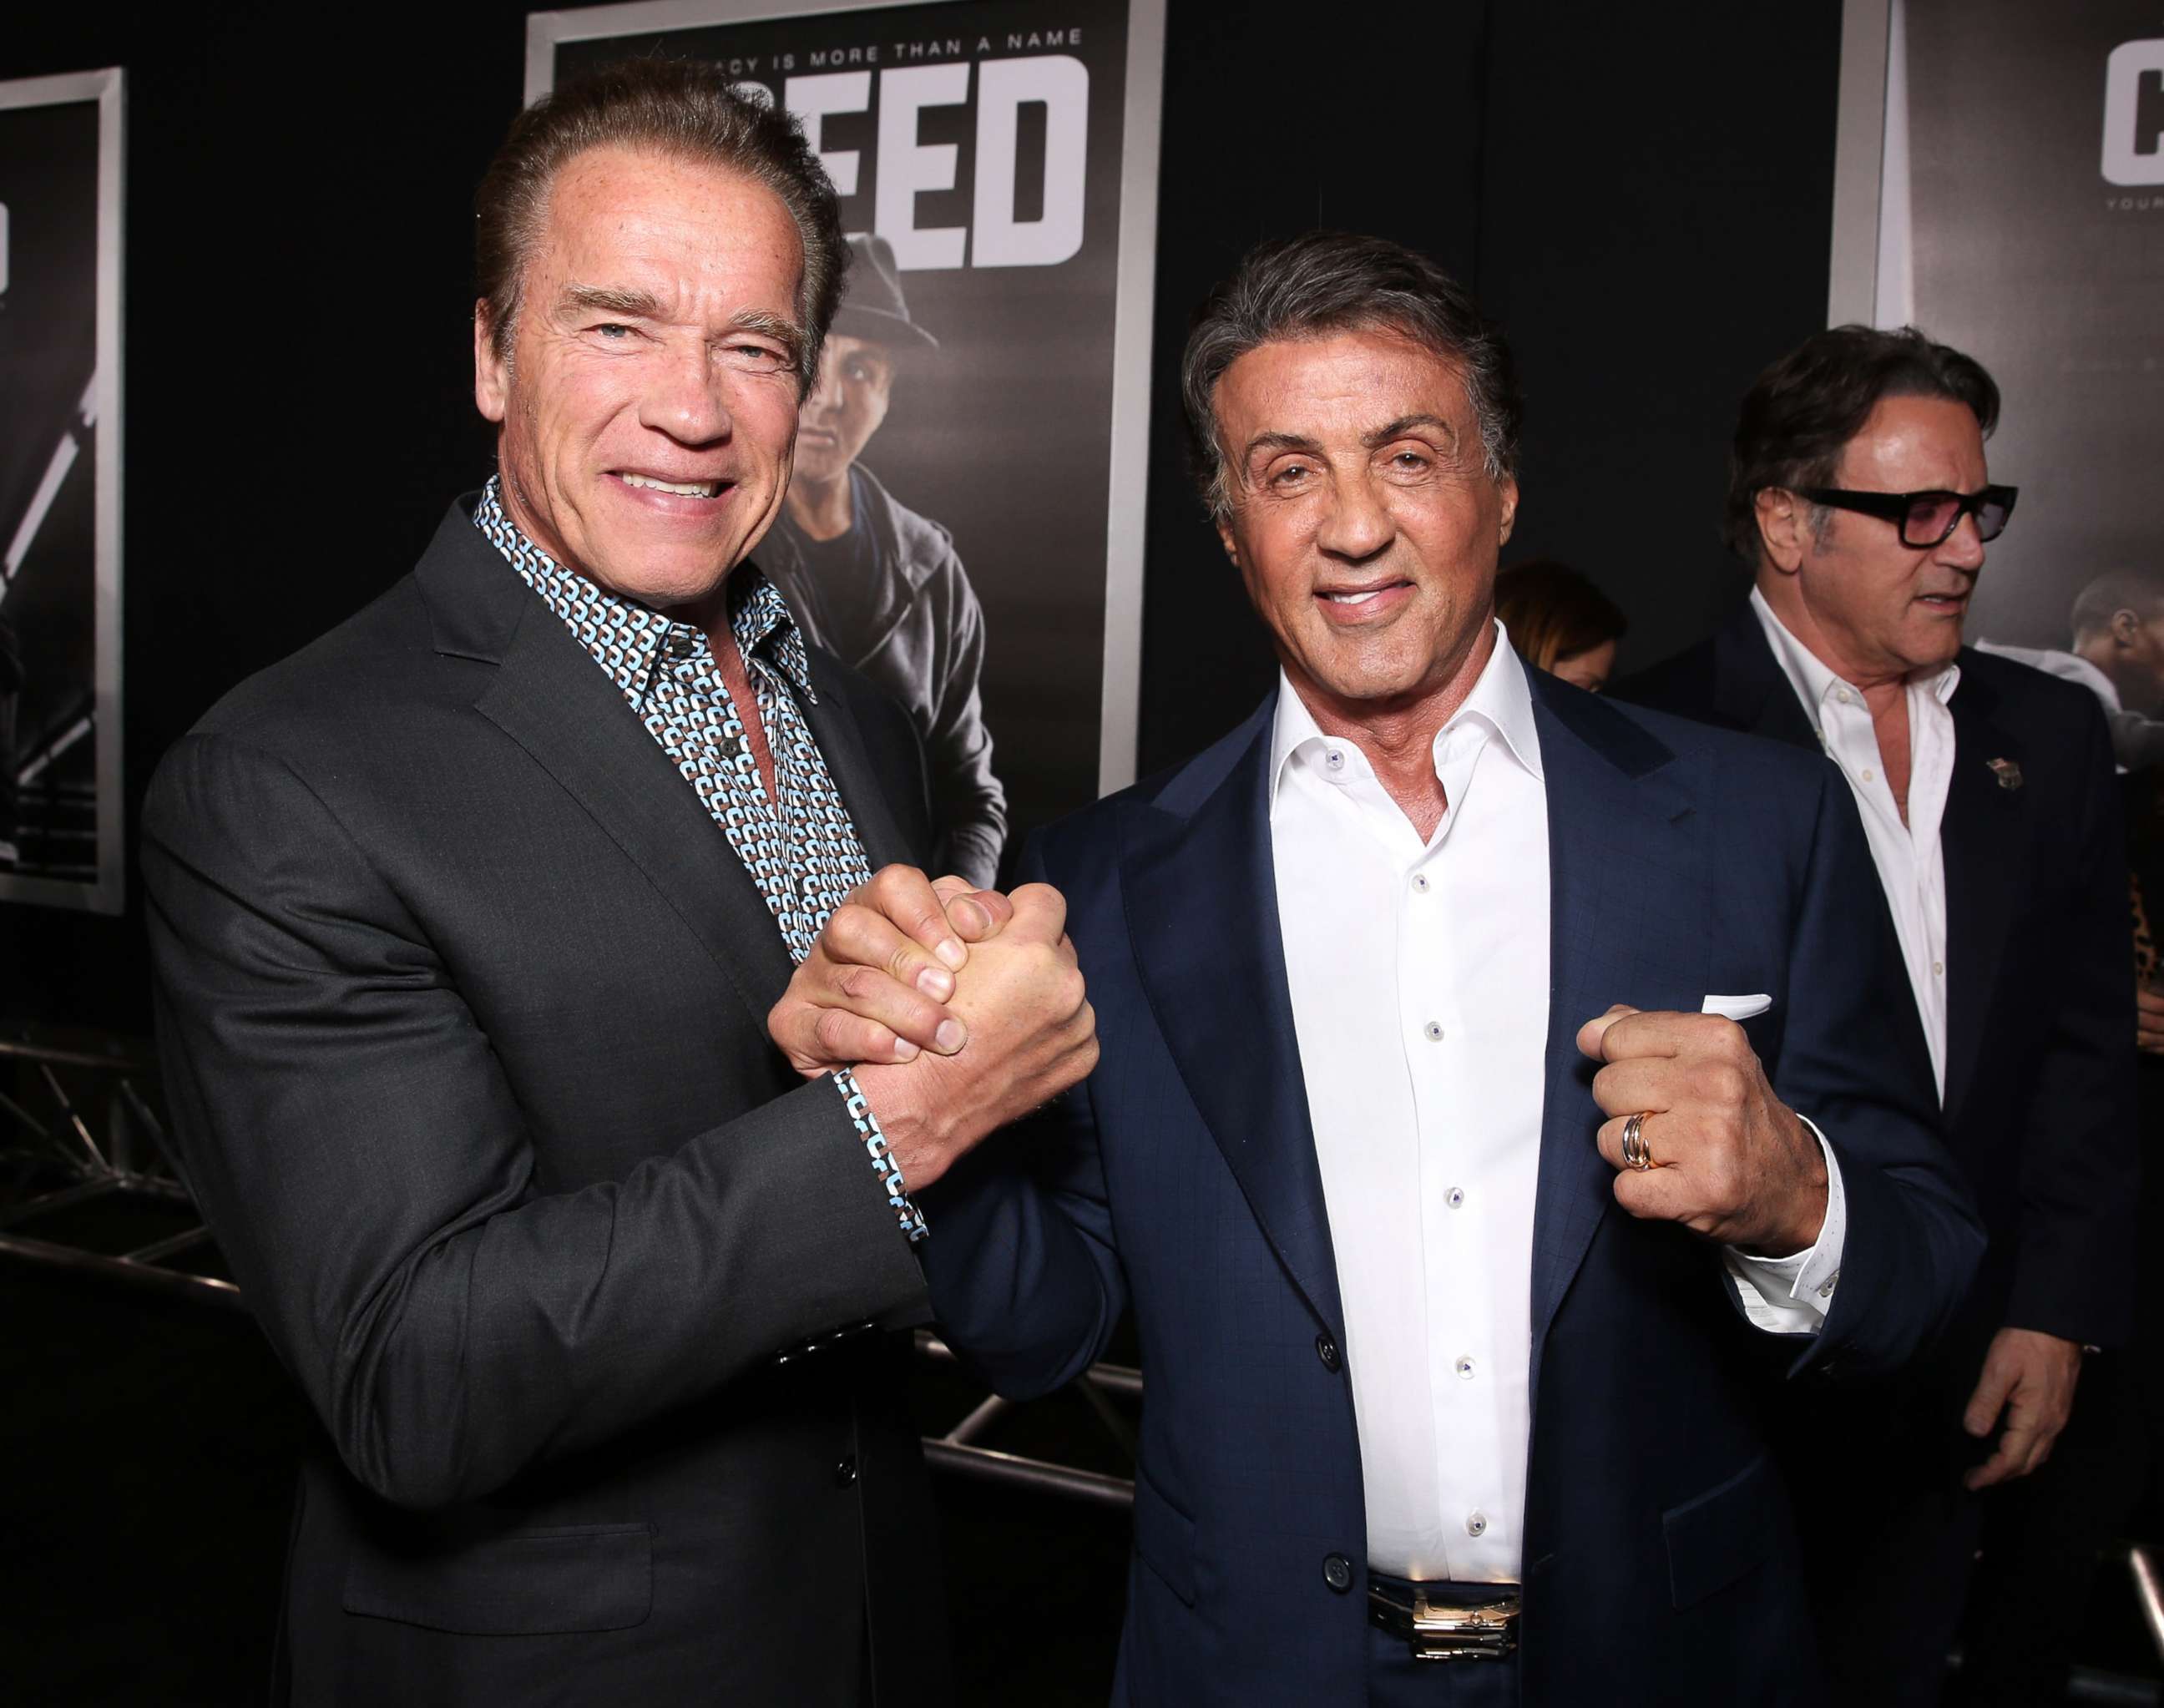 PHOTO: In this Nov. 19, 2015, file photo, Arnold Schwarzenegger and Sylvester Stallone attend a premiere in Westwood, Calif.